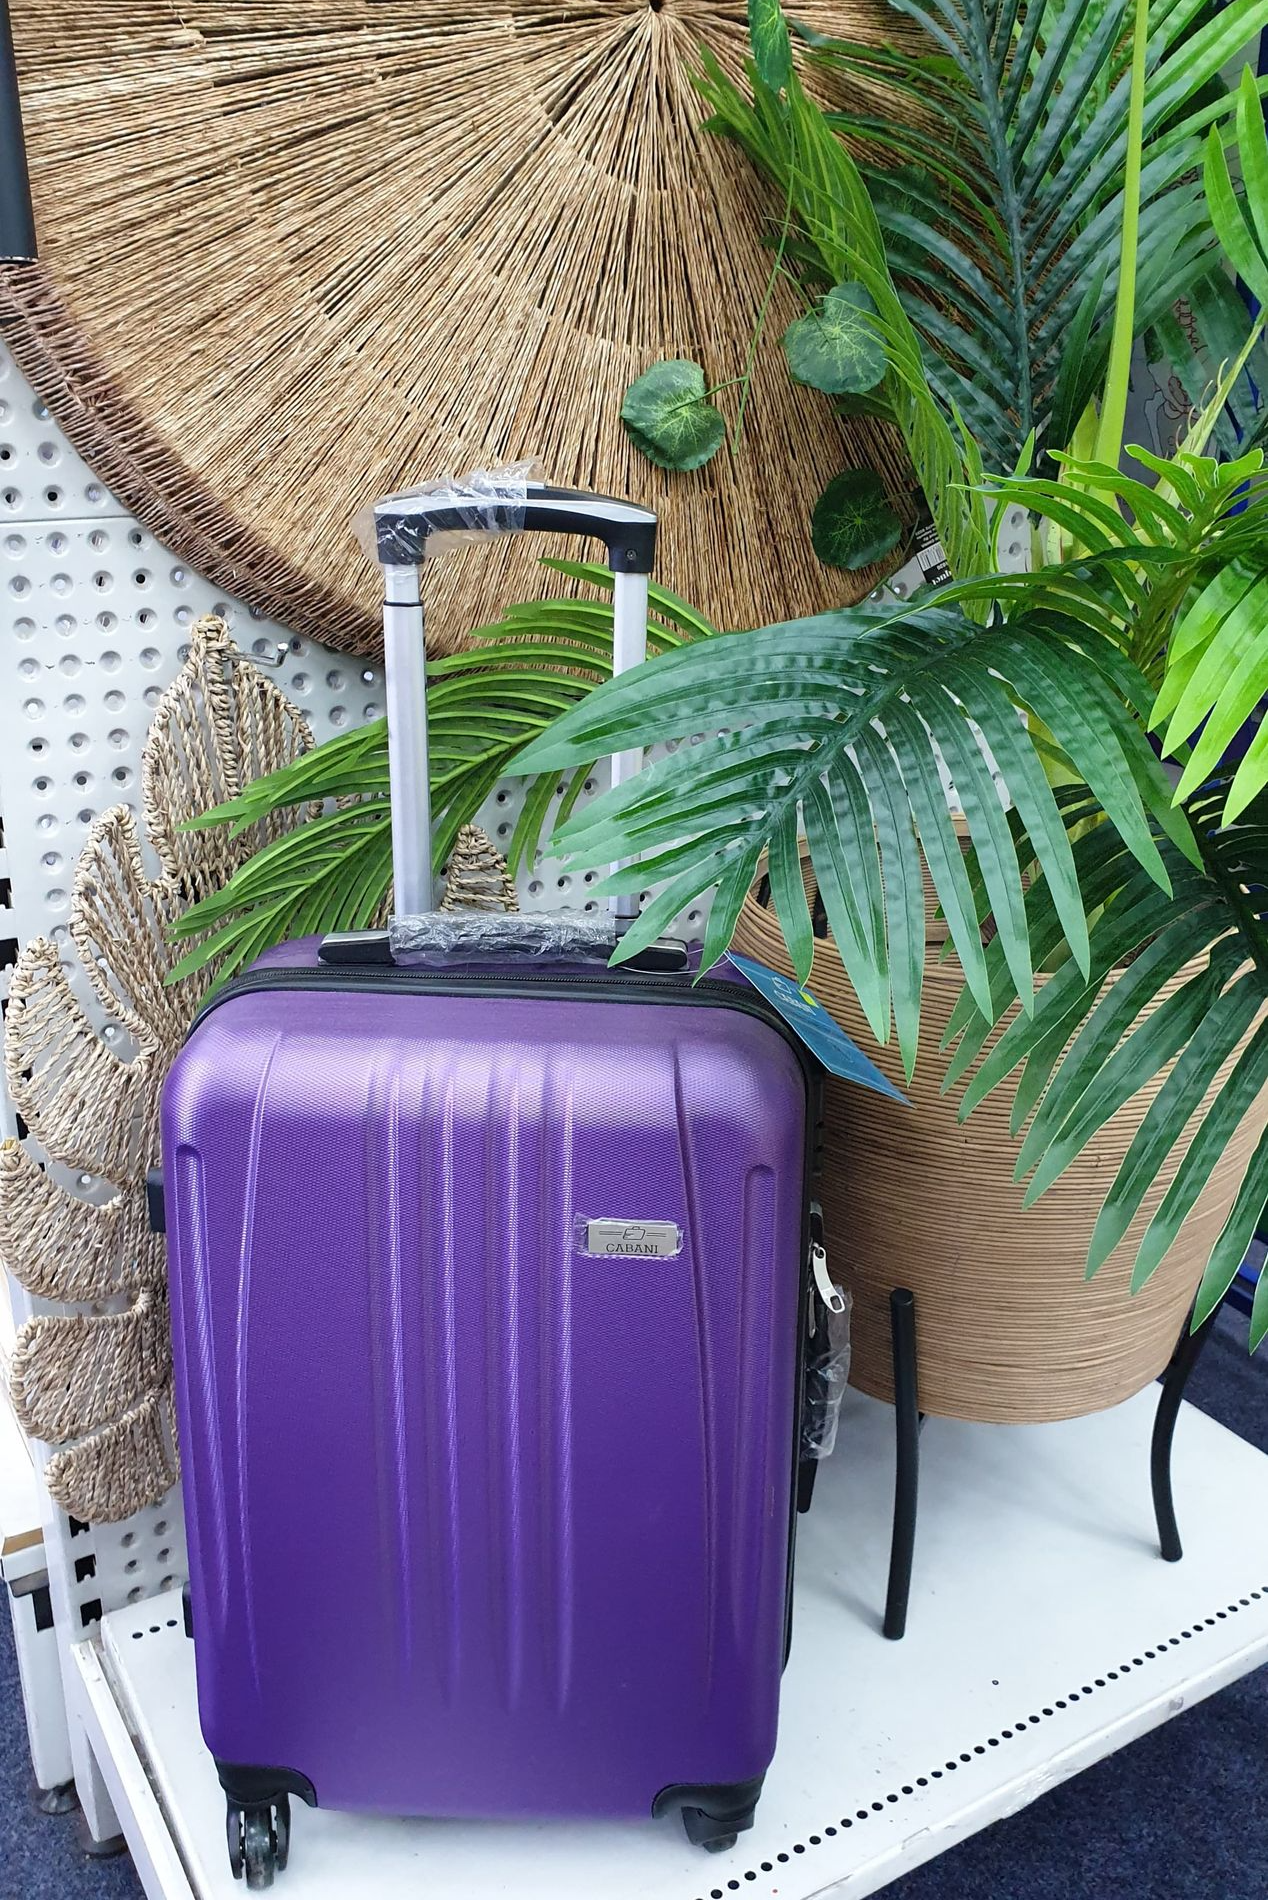 Luggage Suitcase — Travel Bags & Luggage in Alice Springs, NT